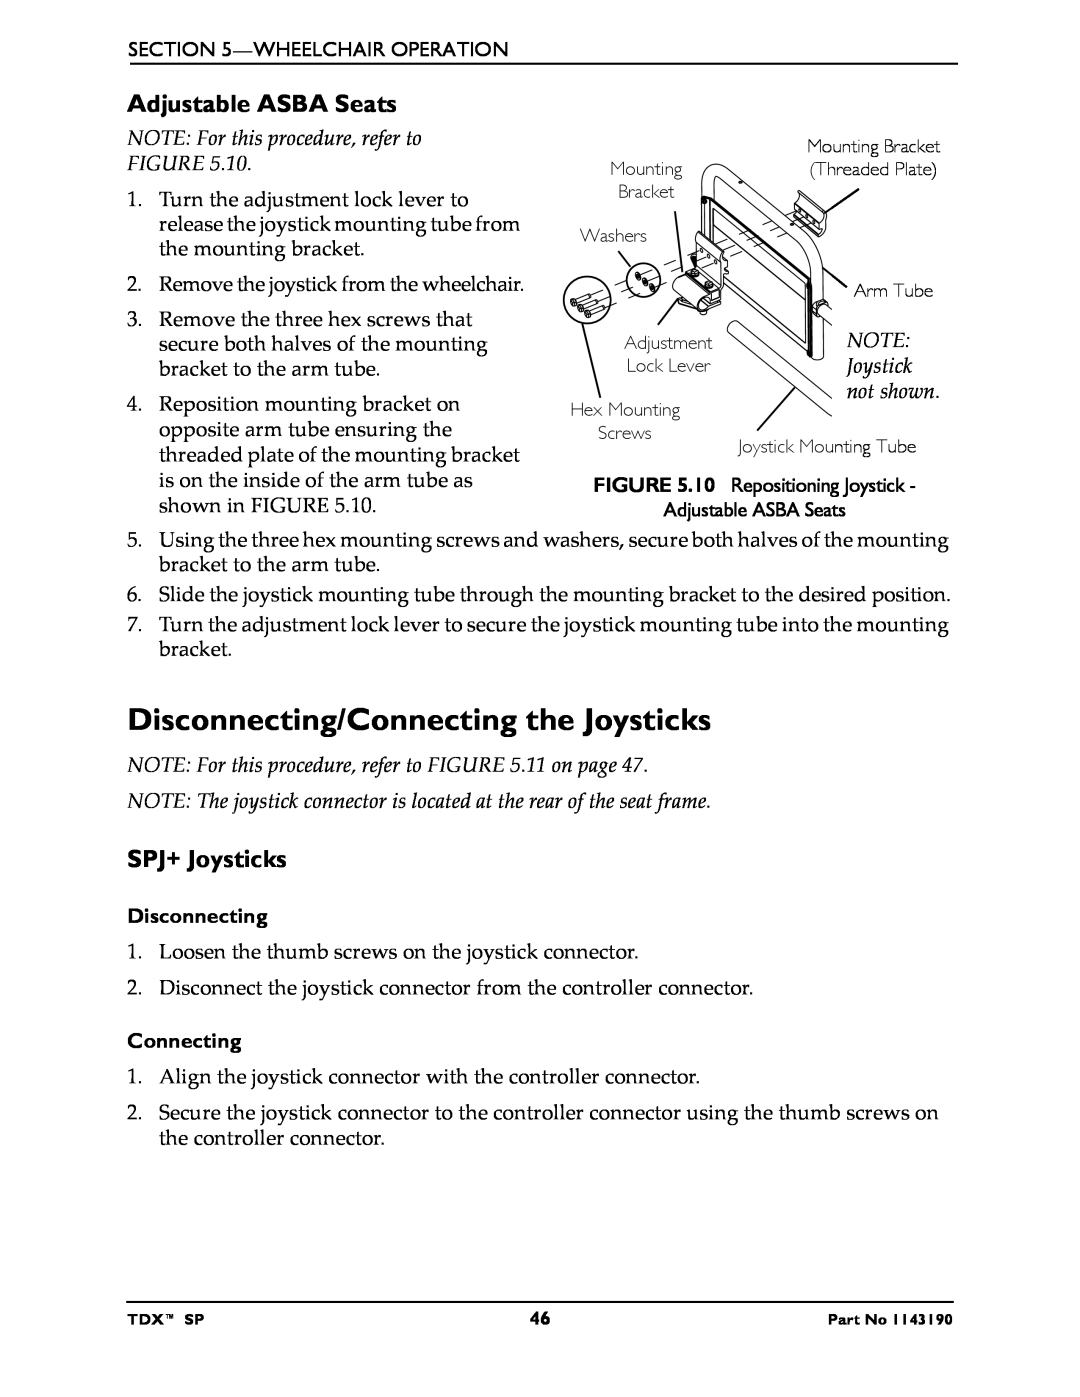 Invacare SP manual Disconnecting/Connecting the Joysticks, NOTE For this procedure, refer to 